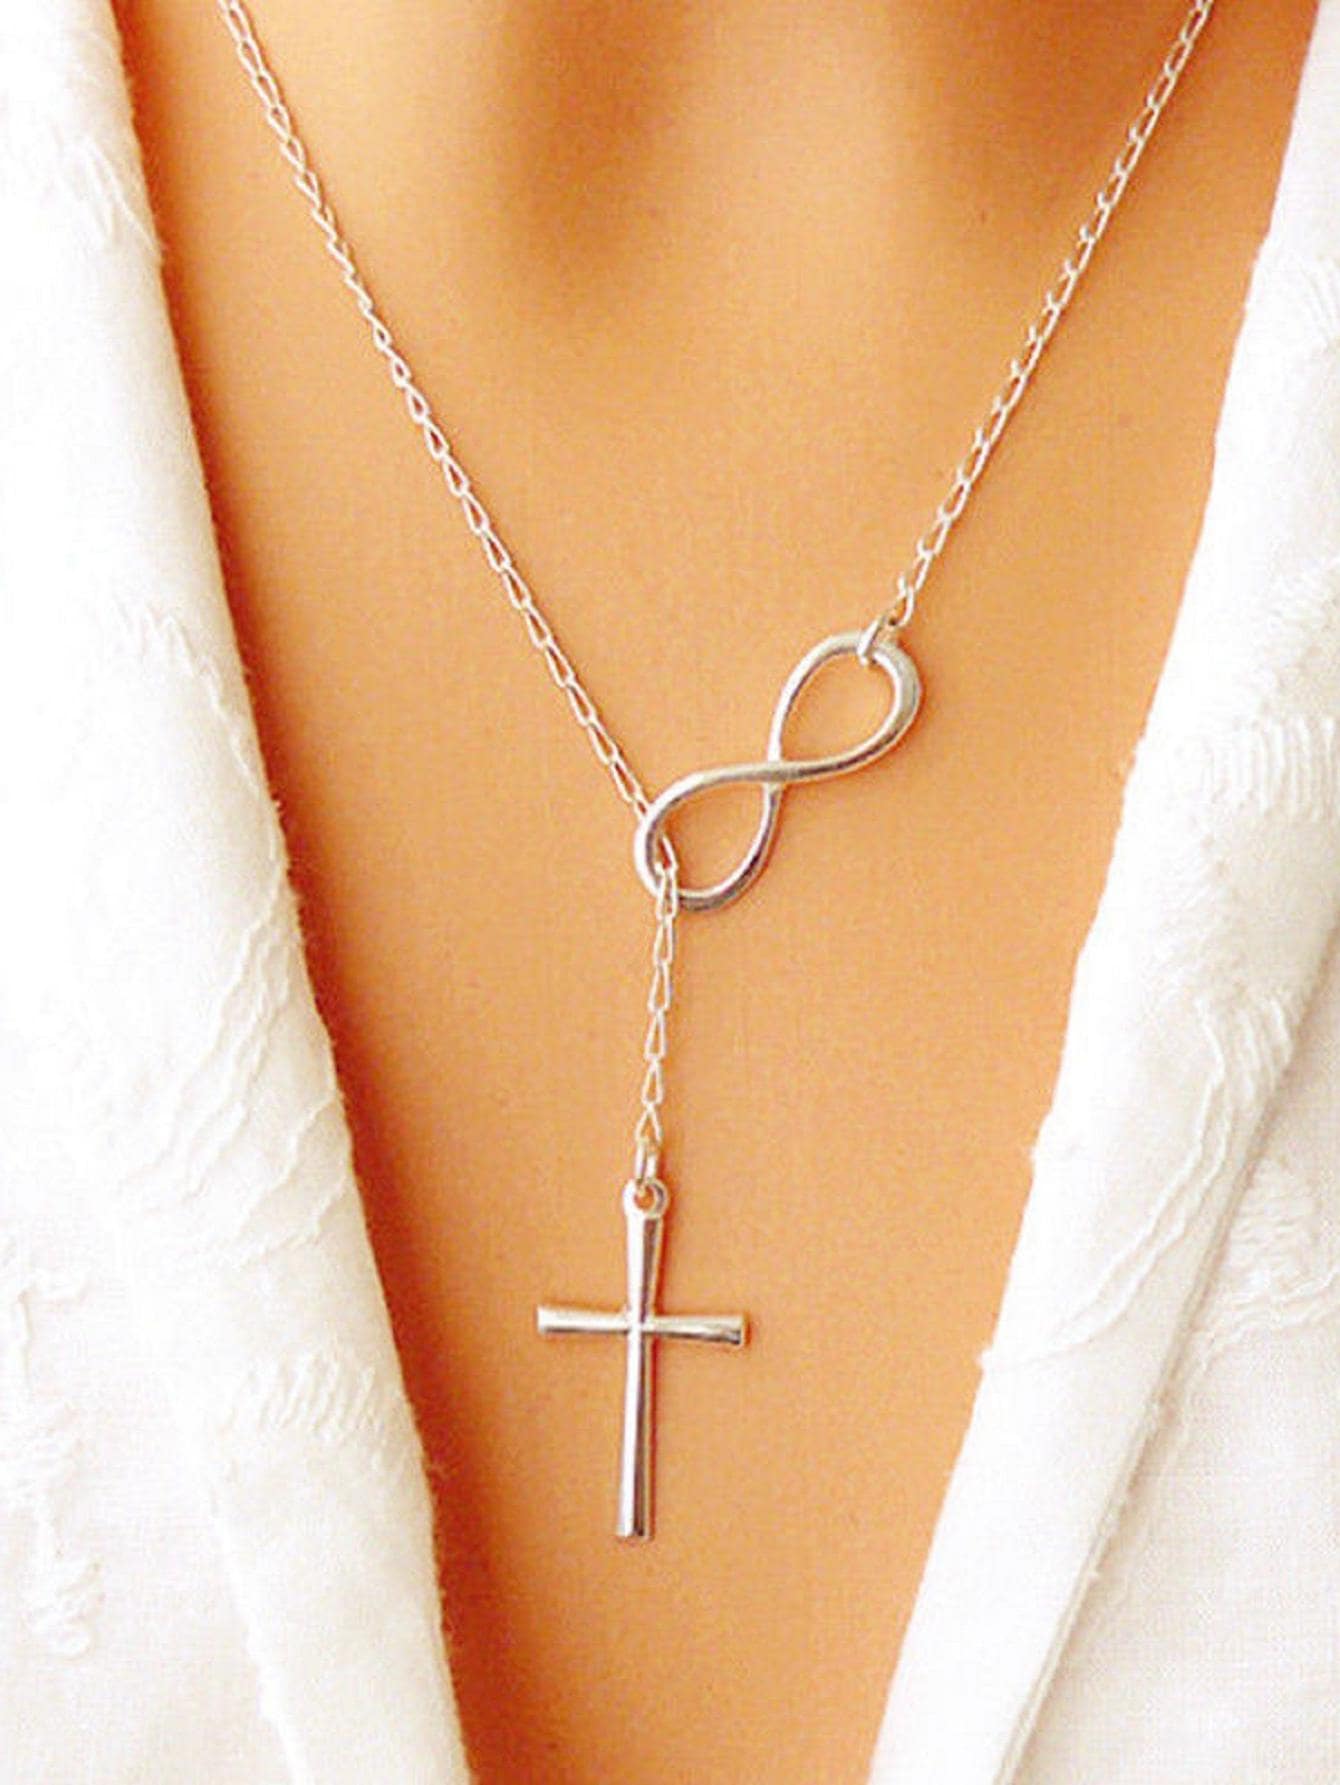 Fashionable Simple Infinity Cross Pendant Necklace